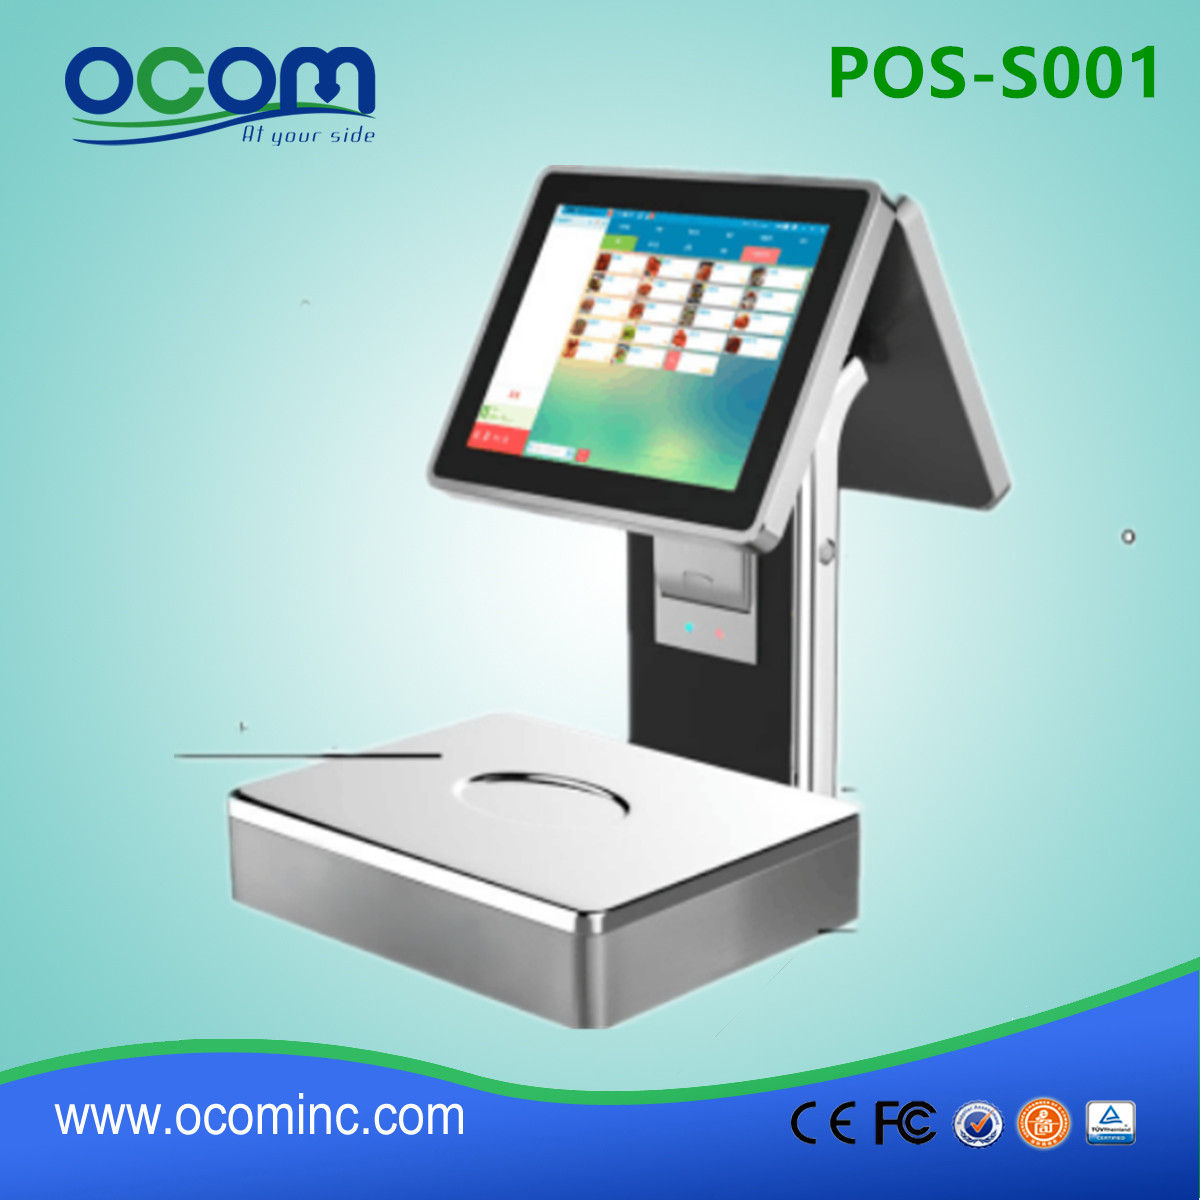 POS-S001-All-in-one Dual-Screen-Touch-POS-Waage mit integriertem Drucker